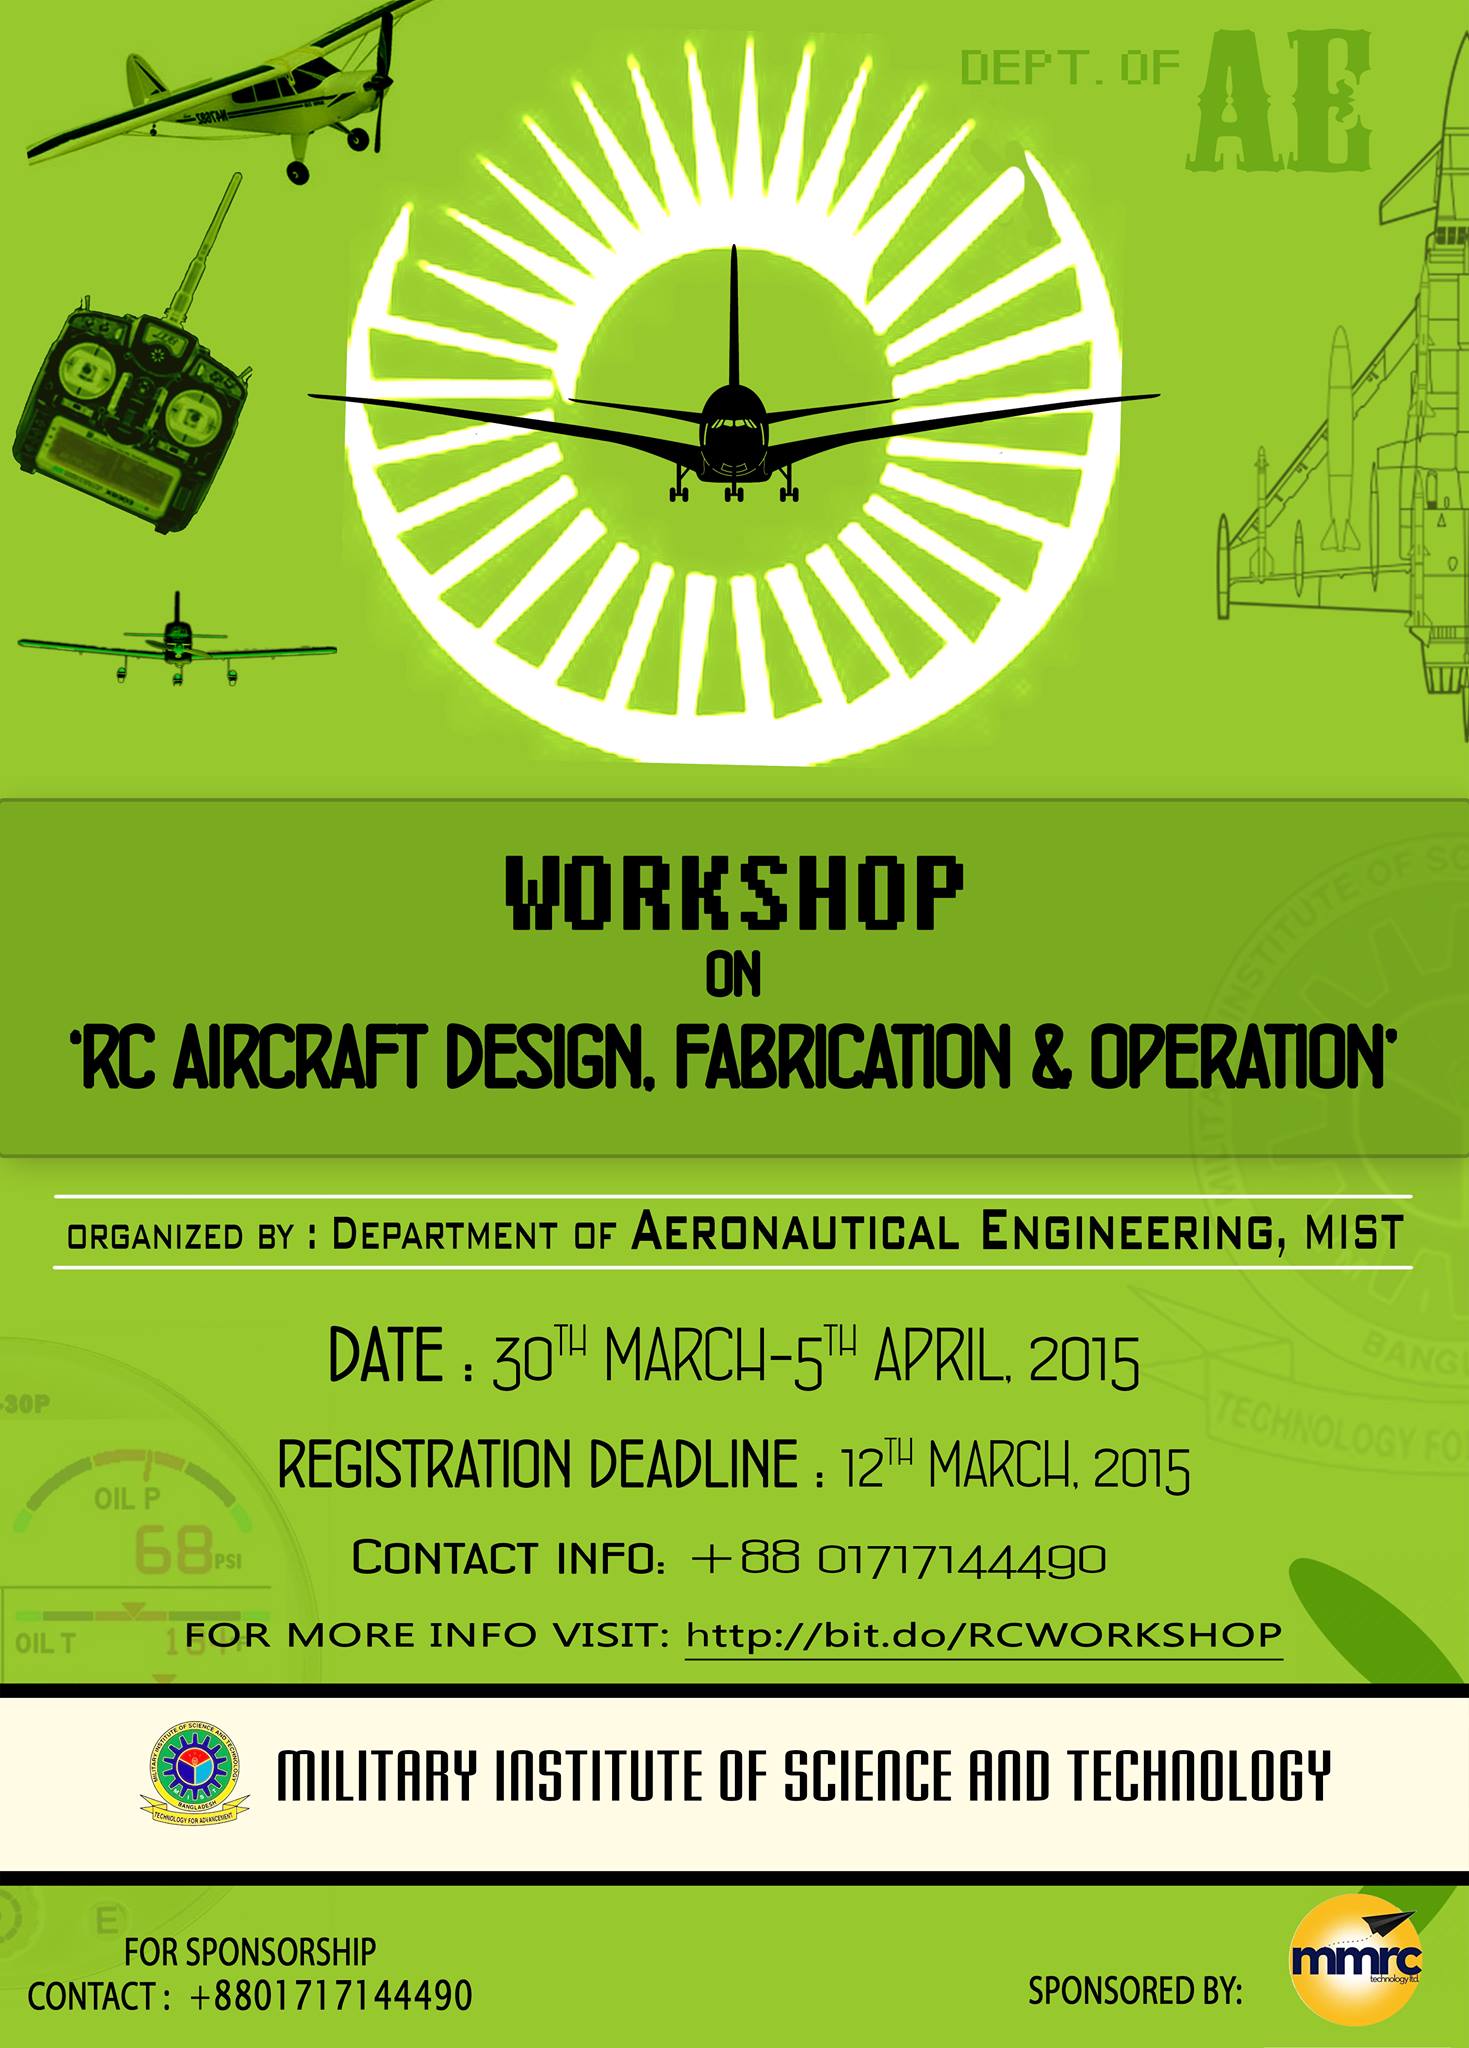 WORKSHOP ON "RC AIRCRAFT DESIGN, FABRICATION AND OPERATION"